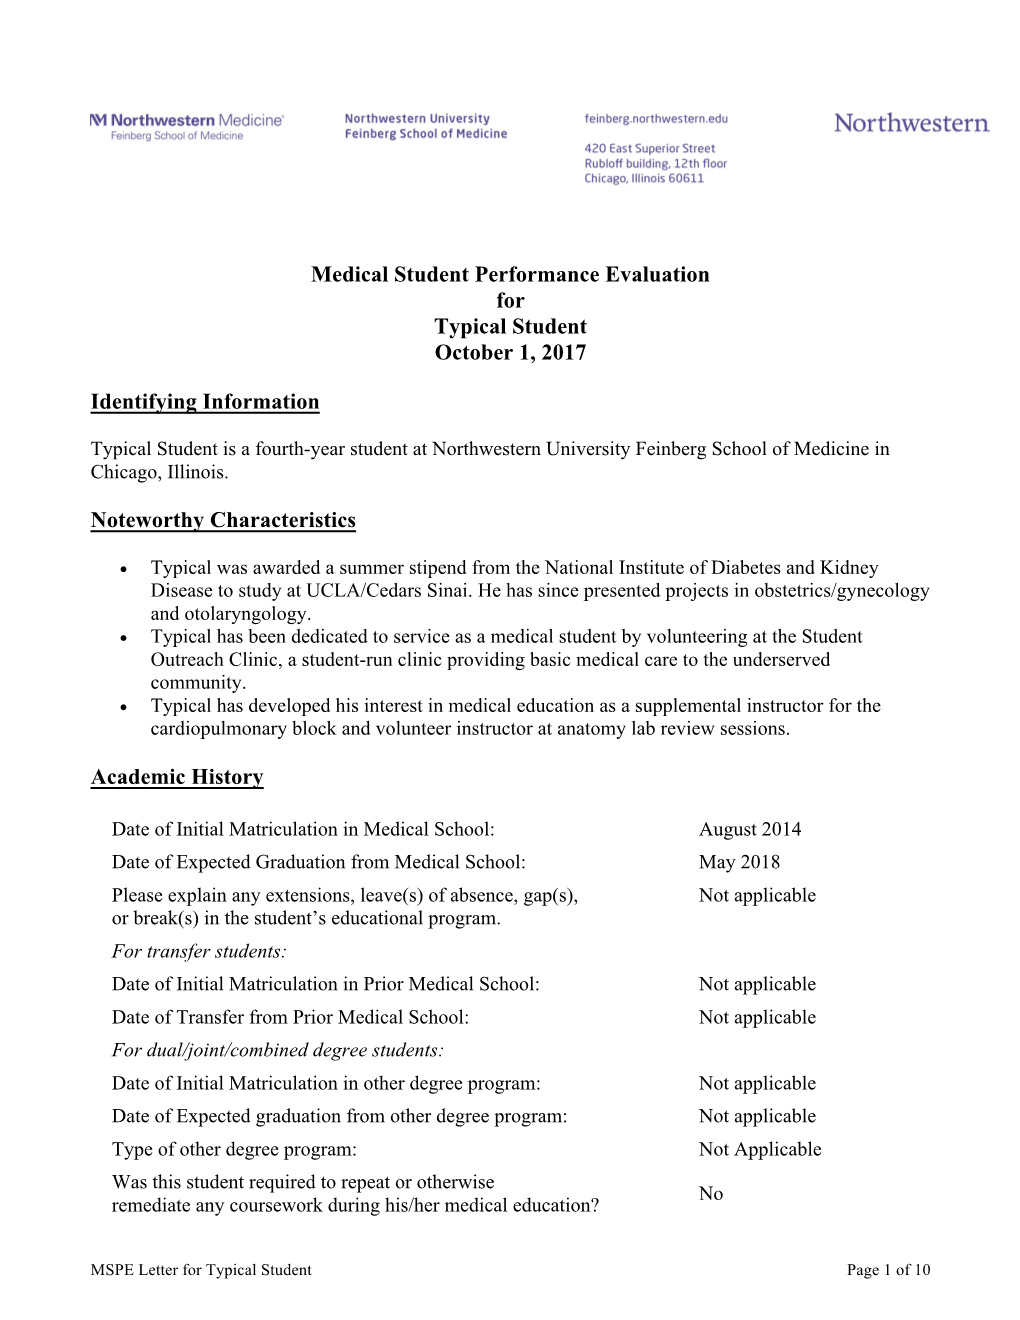 Medical Student Performance Evaluation for Typical Student October 1, 2017